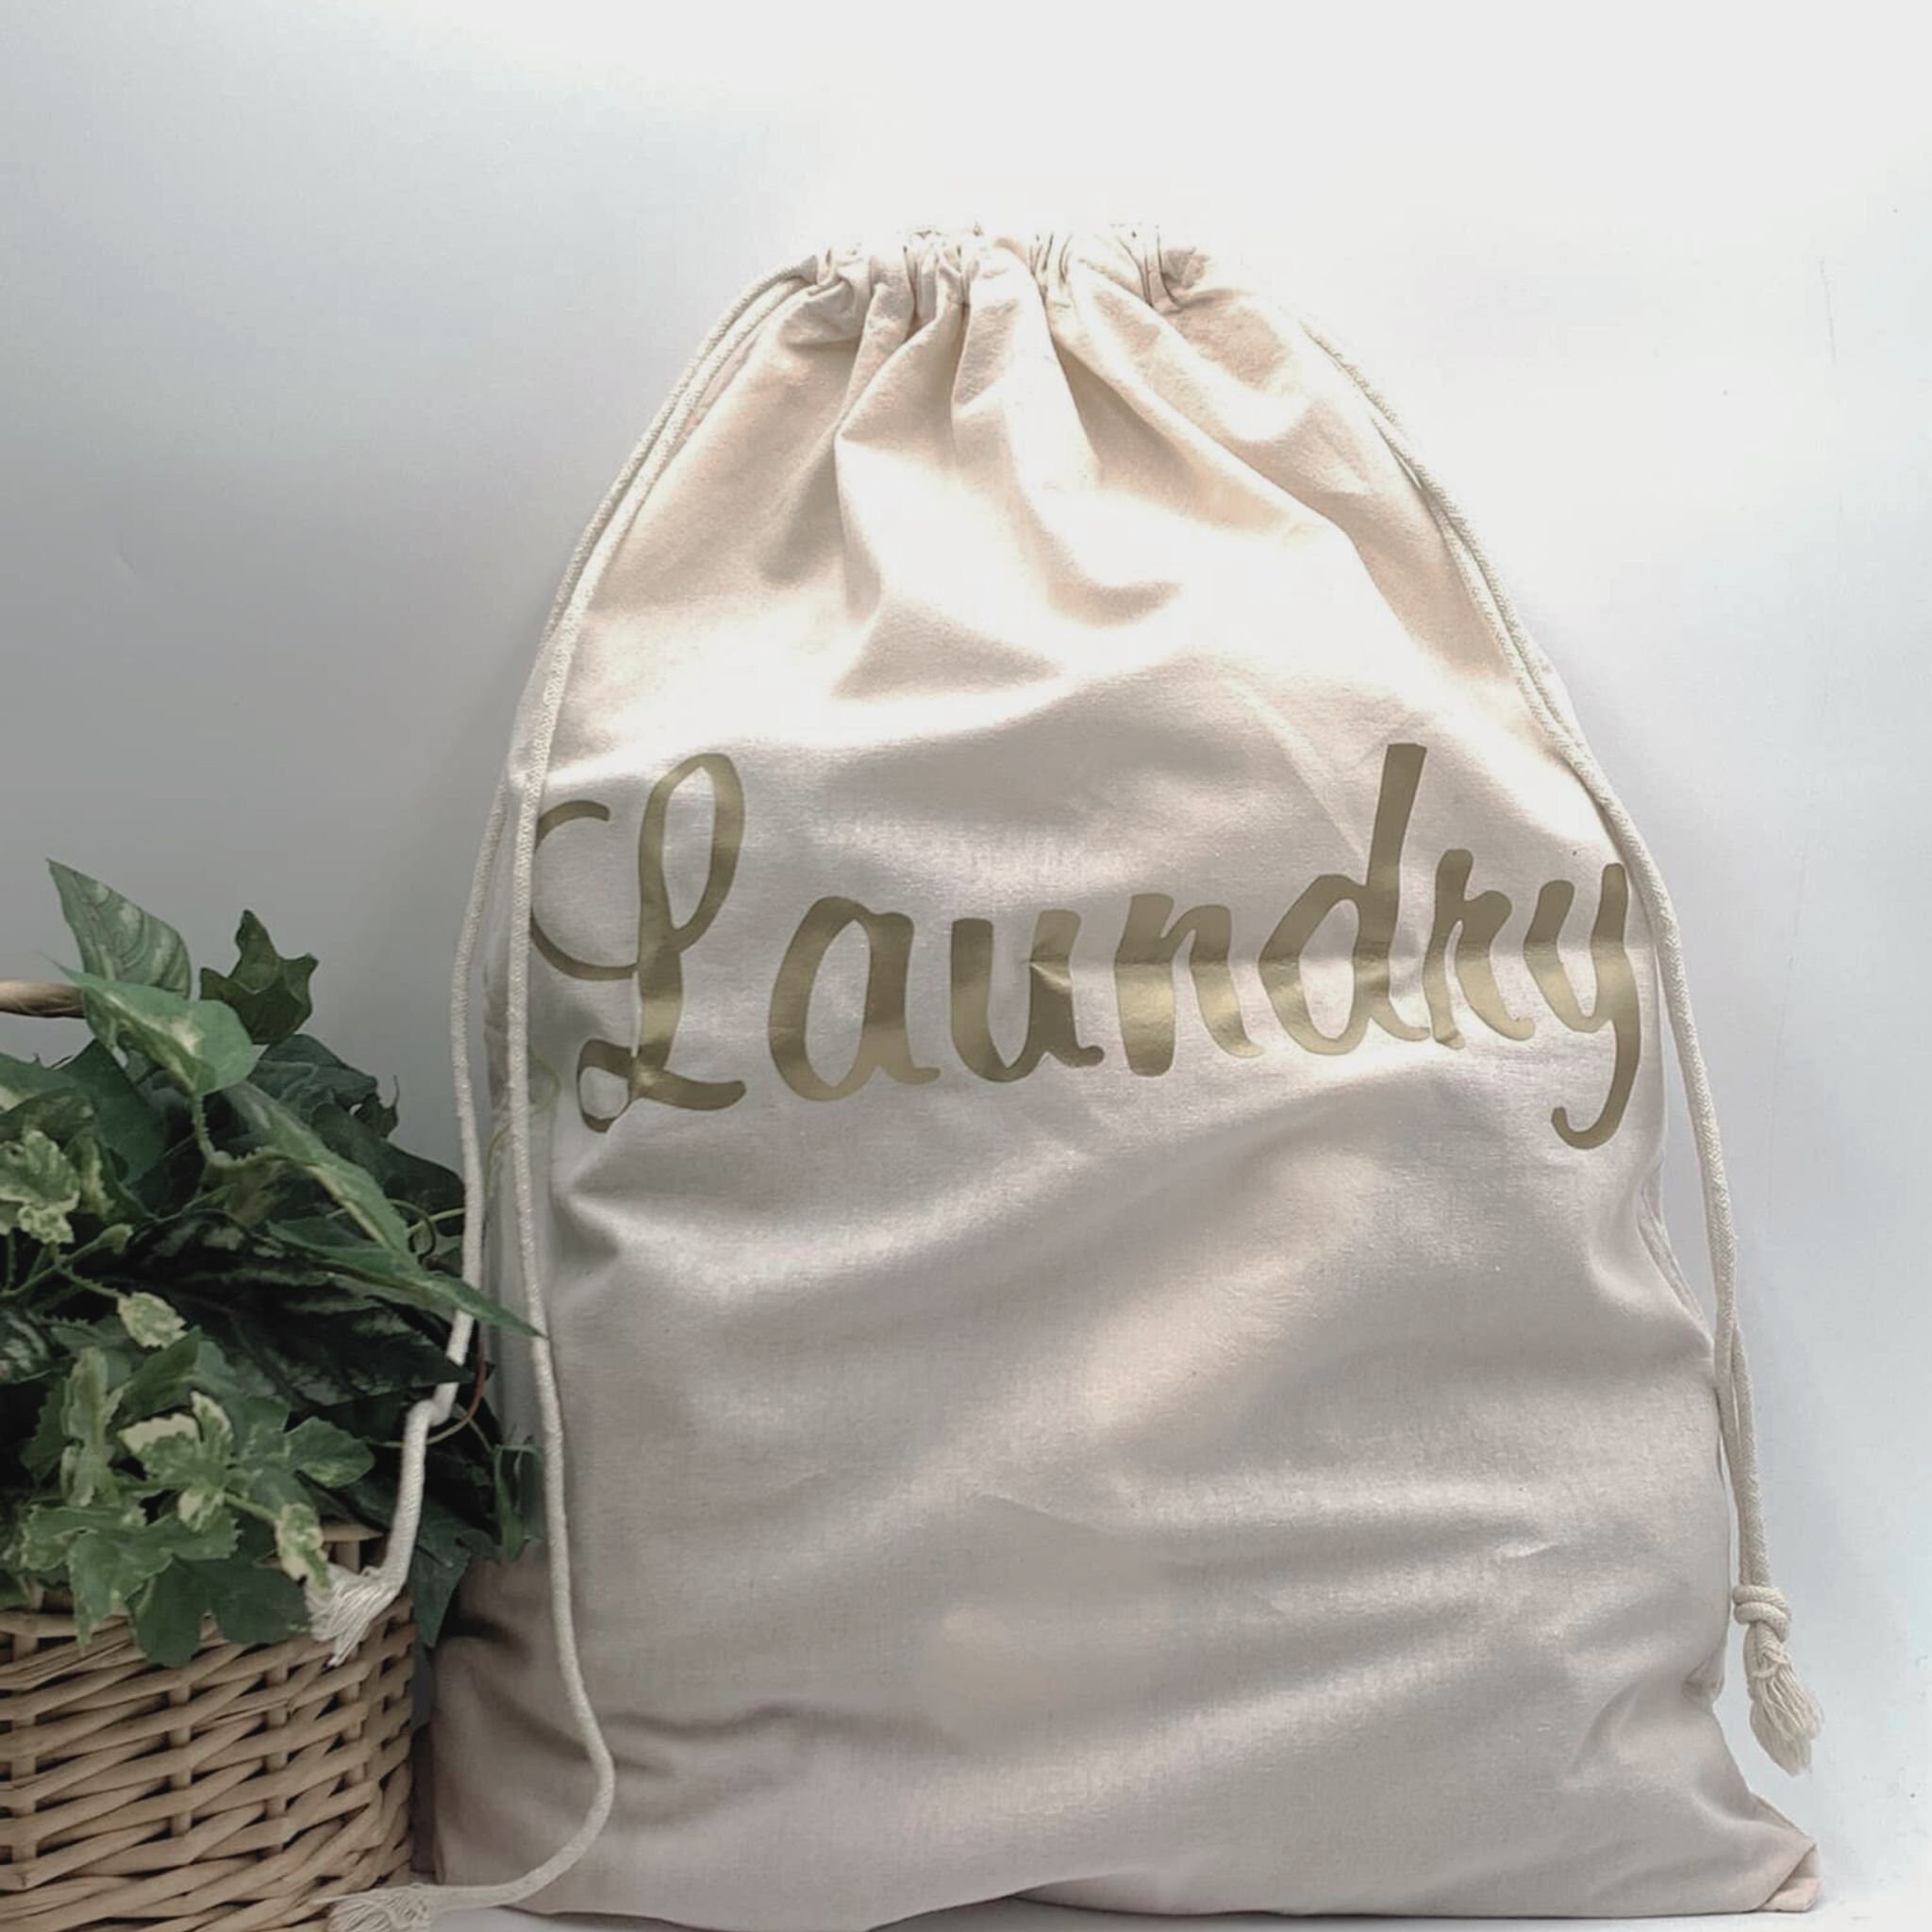  Cotton Laundry Bag Drawstring - 2 Pack, Extra Large Canvas Bags  24'' X 36'' inch - Machine Washable Cotton Fabric - Storage Sack for Dirty  Clothes, Basket Liner, Hamper Bag, Liner